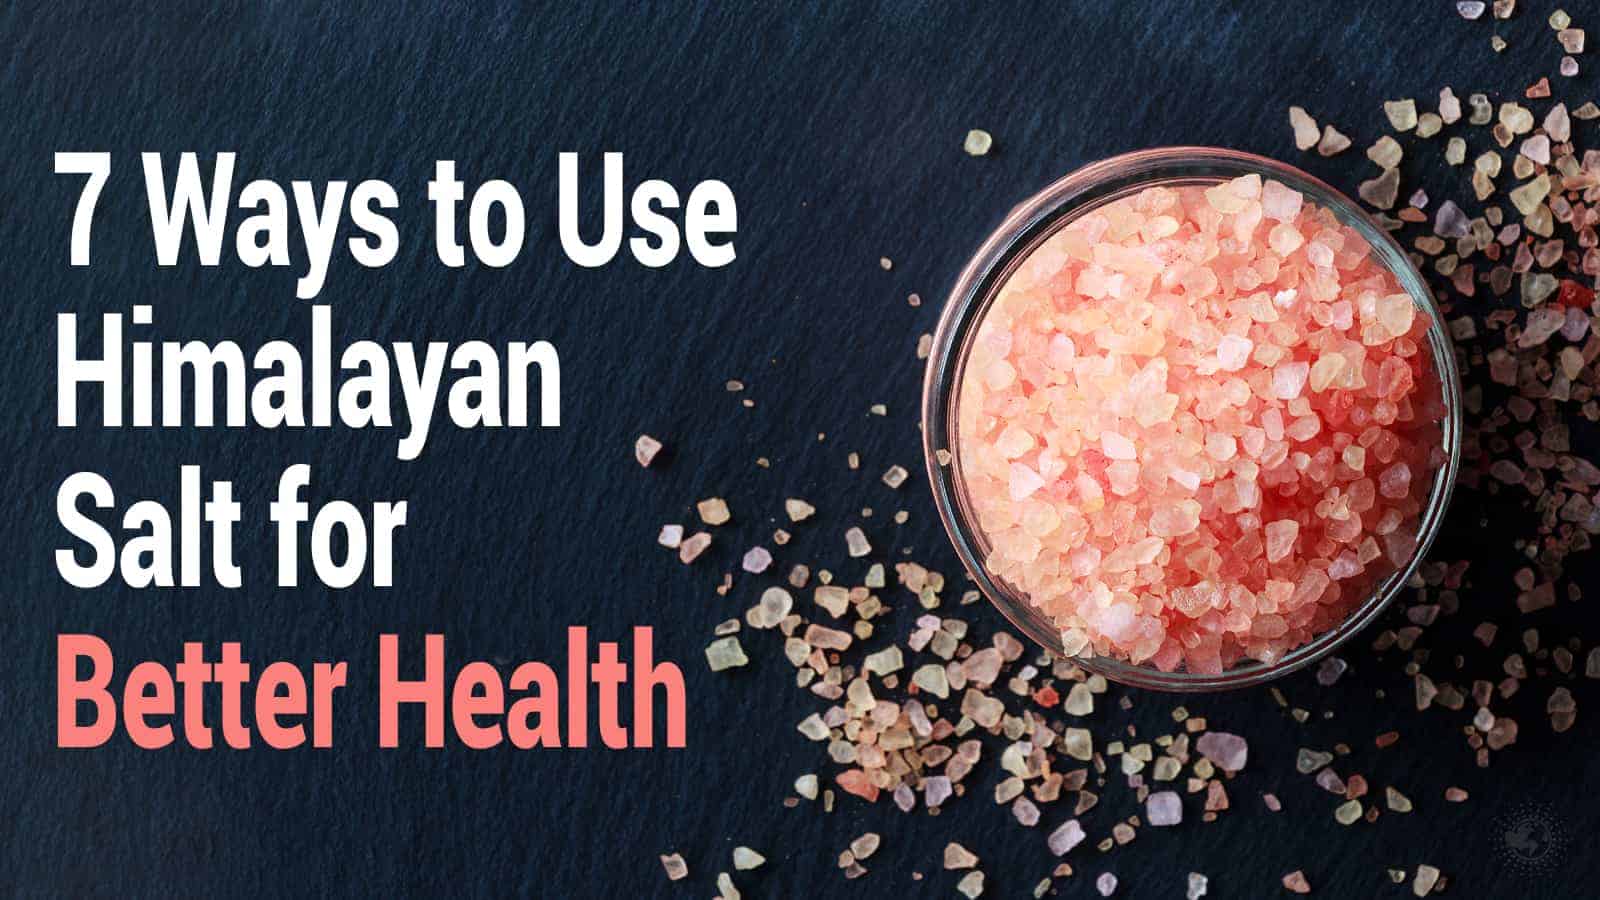 7 Ways to Use Himalayan Salt for Better Health